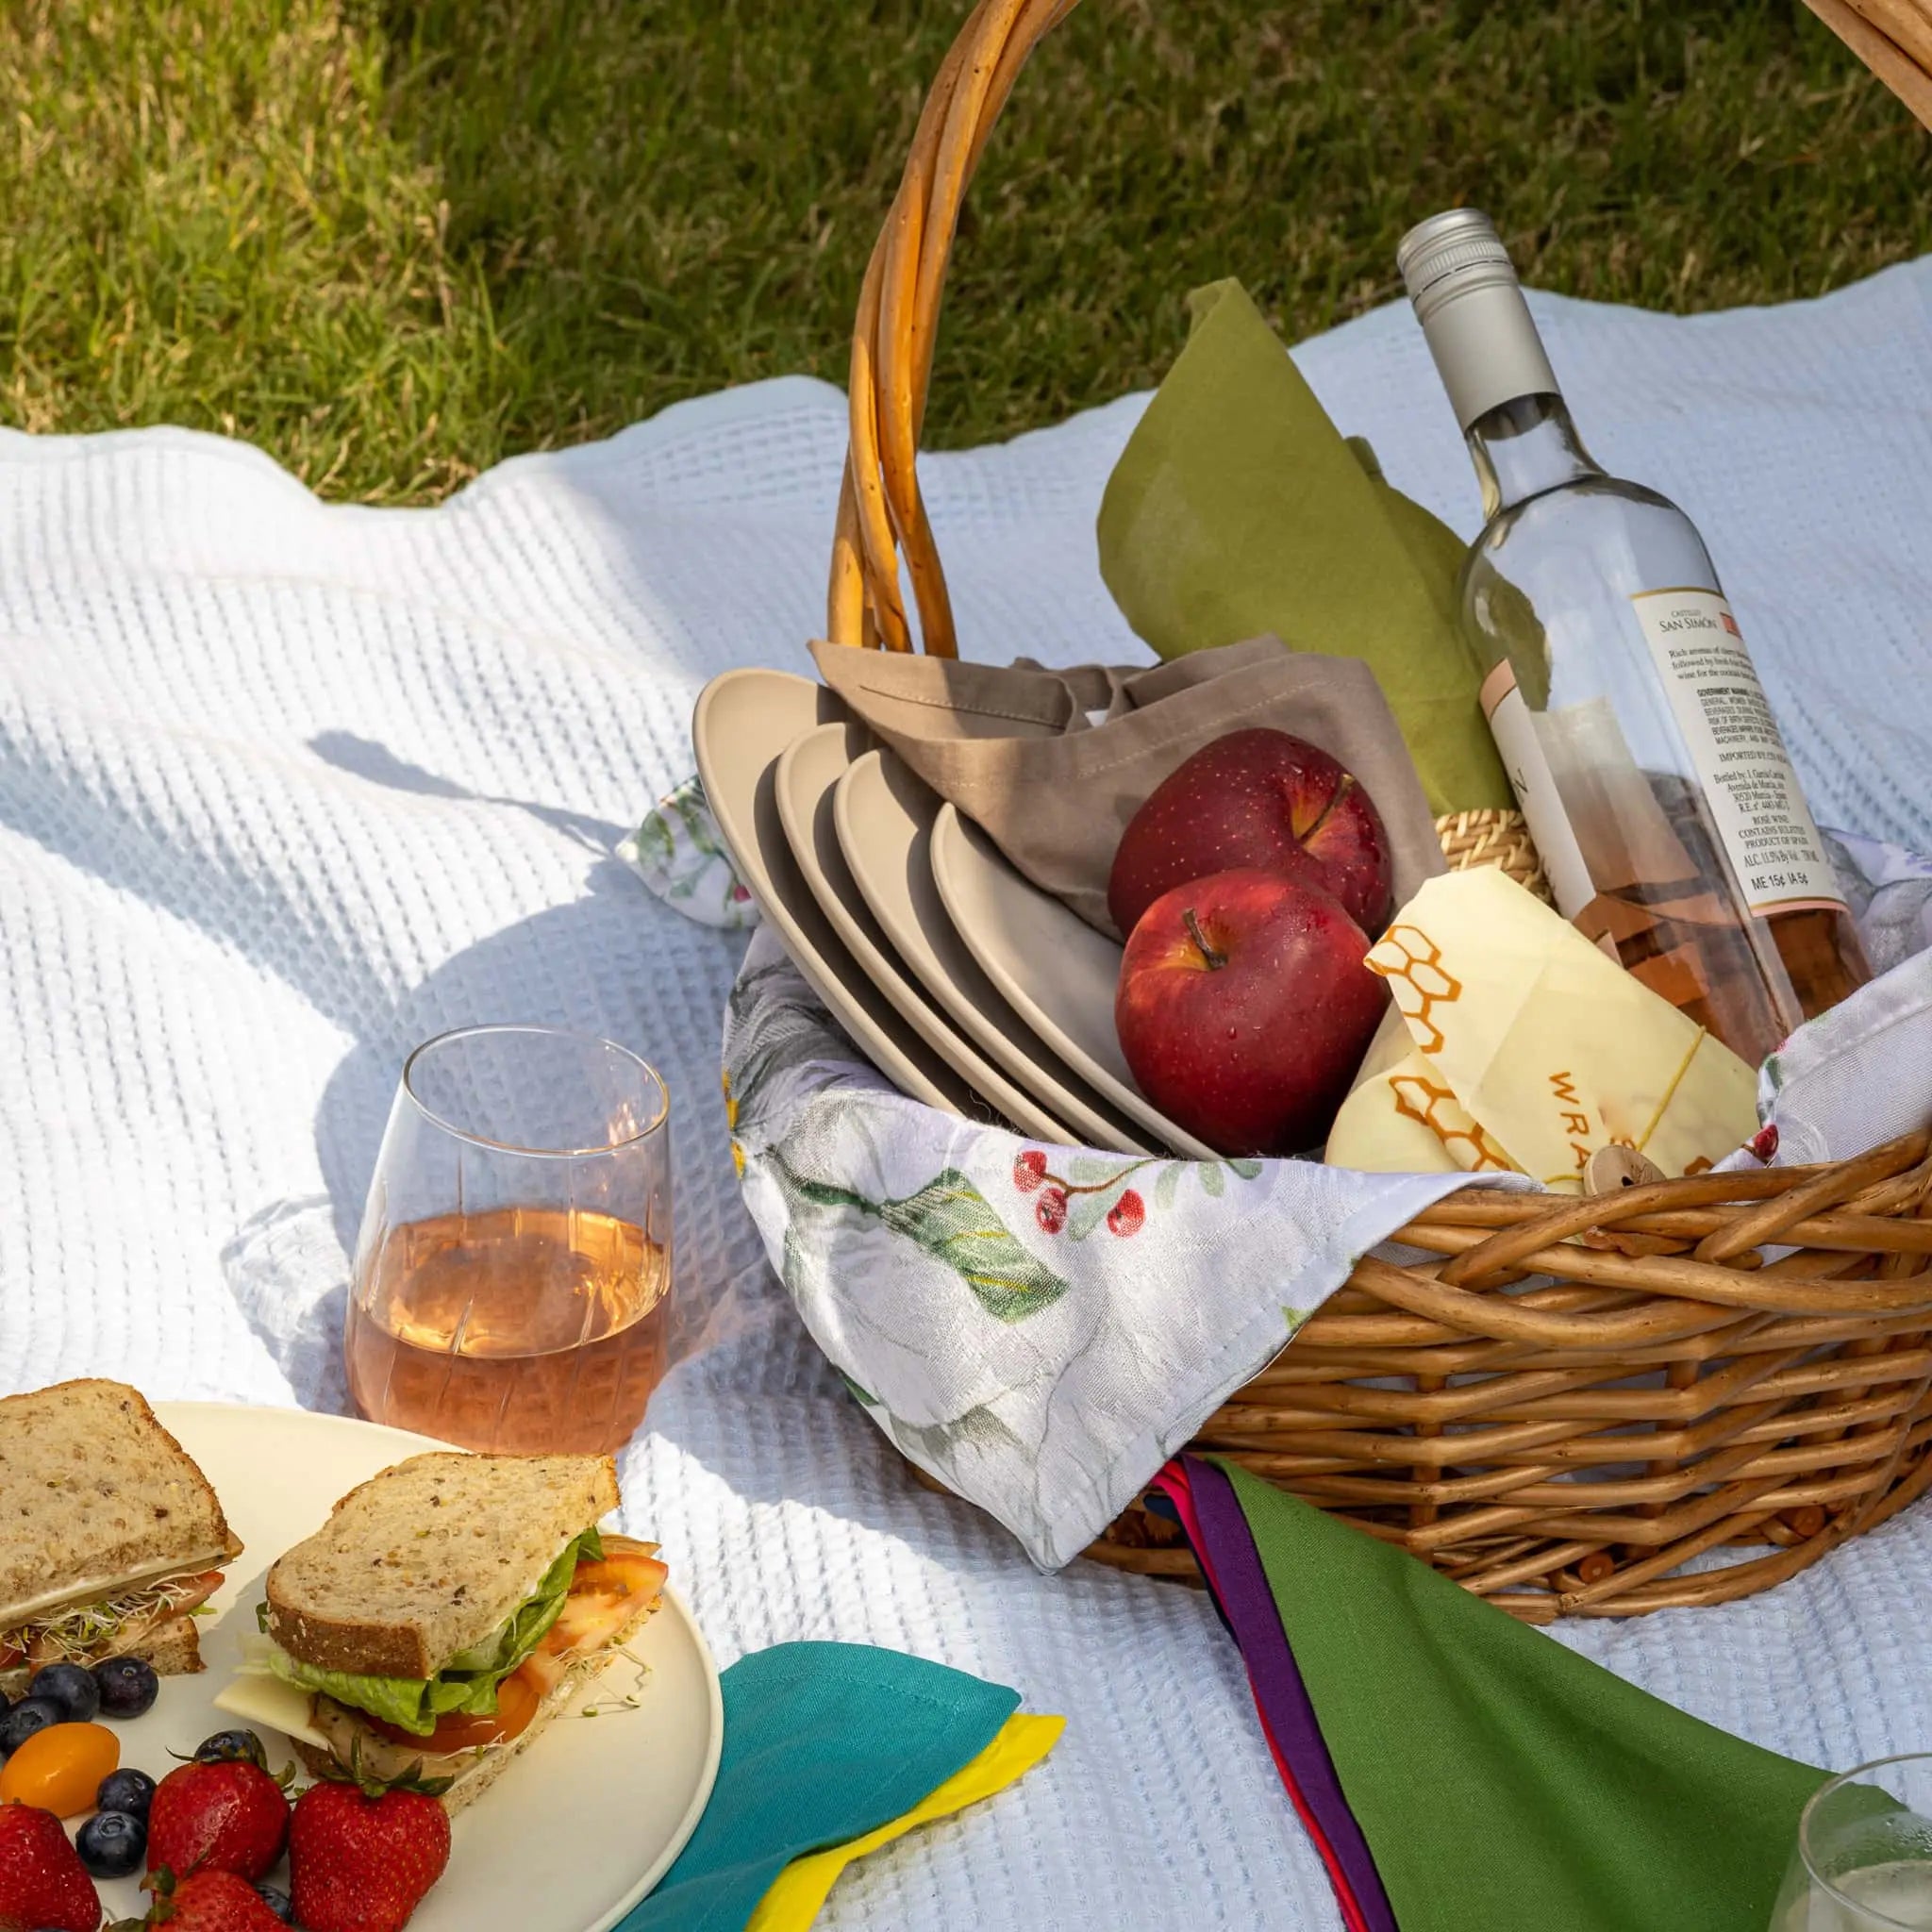 Outdoor dining with picnic basket